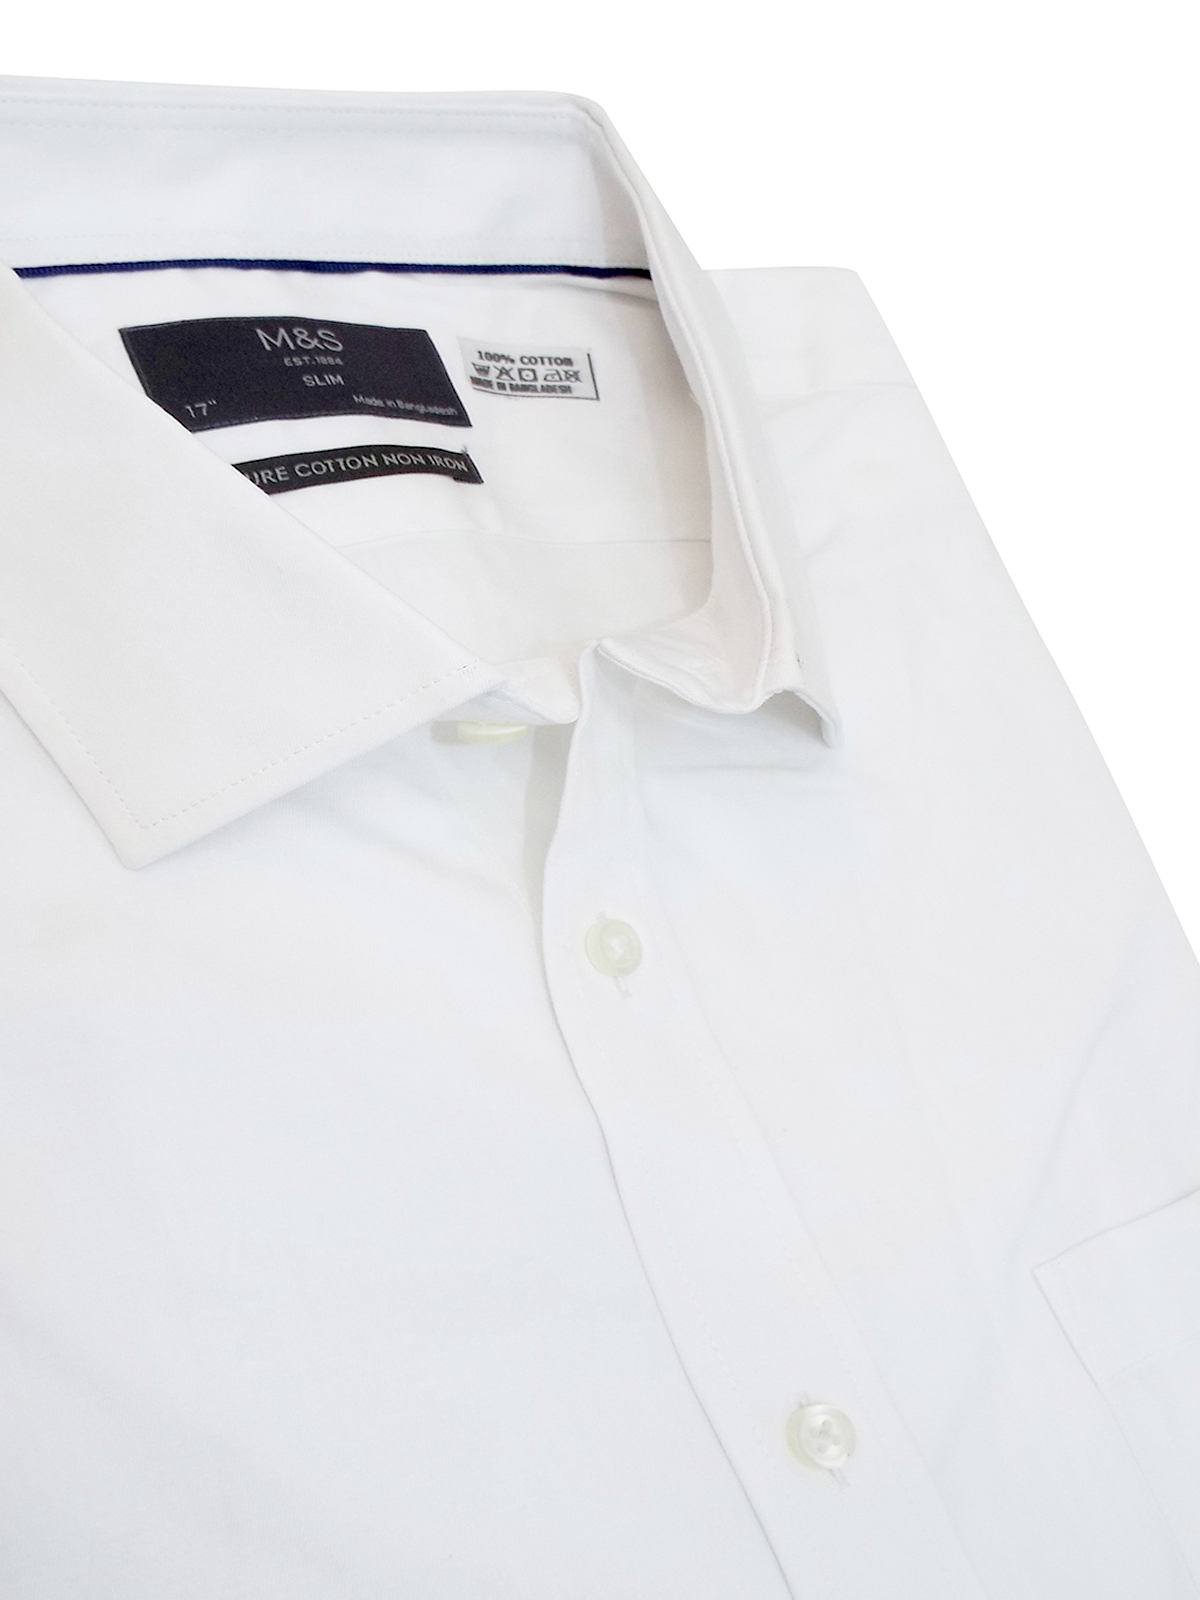 Marks and Spencer - - M&5 WHITE Pure Cotton Non Iron Shirt - Collar ...